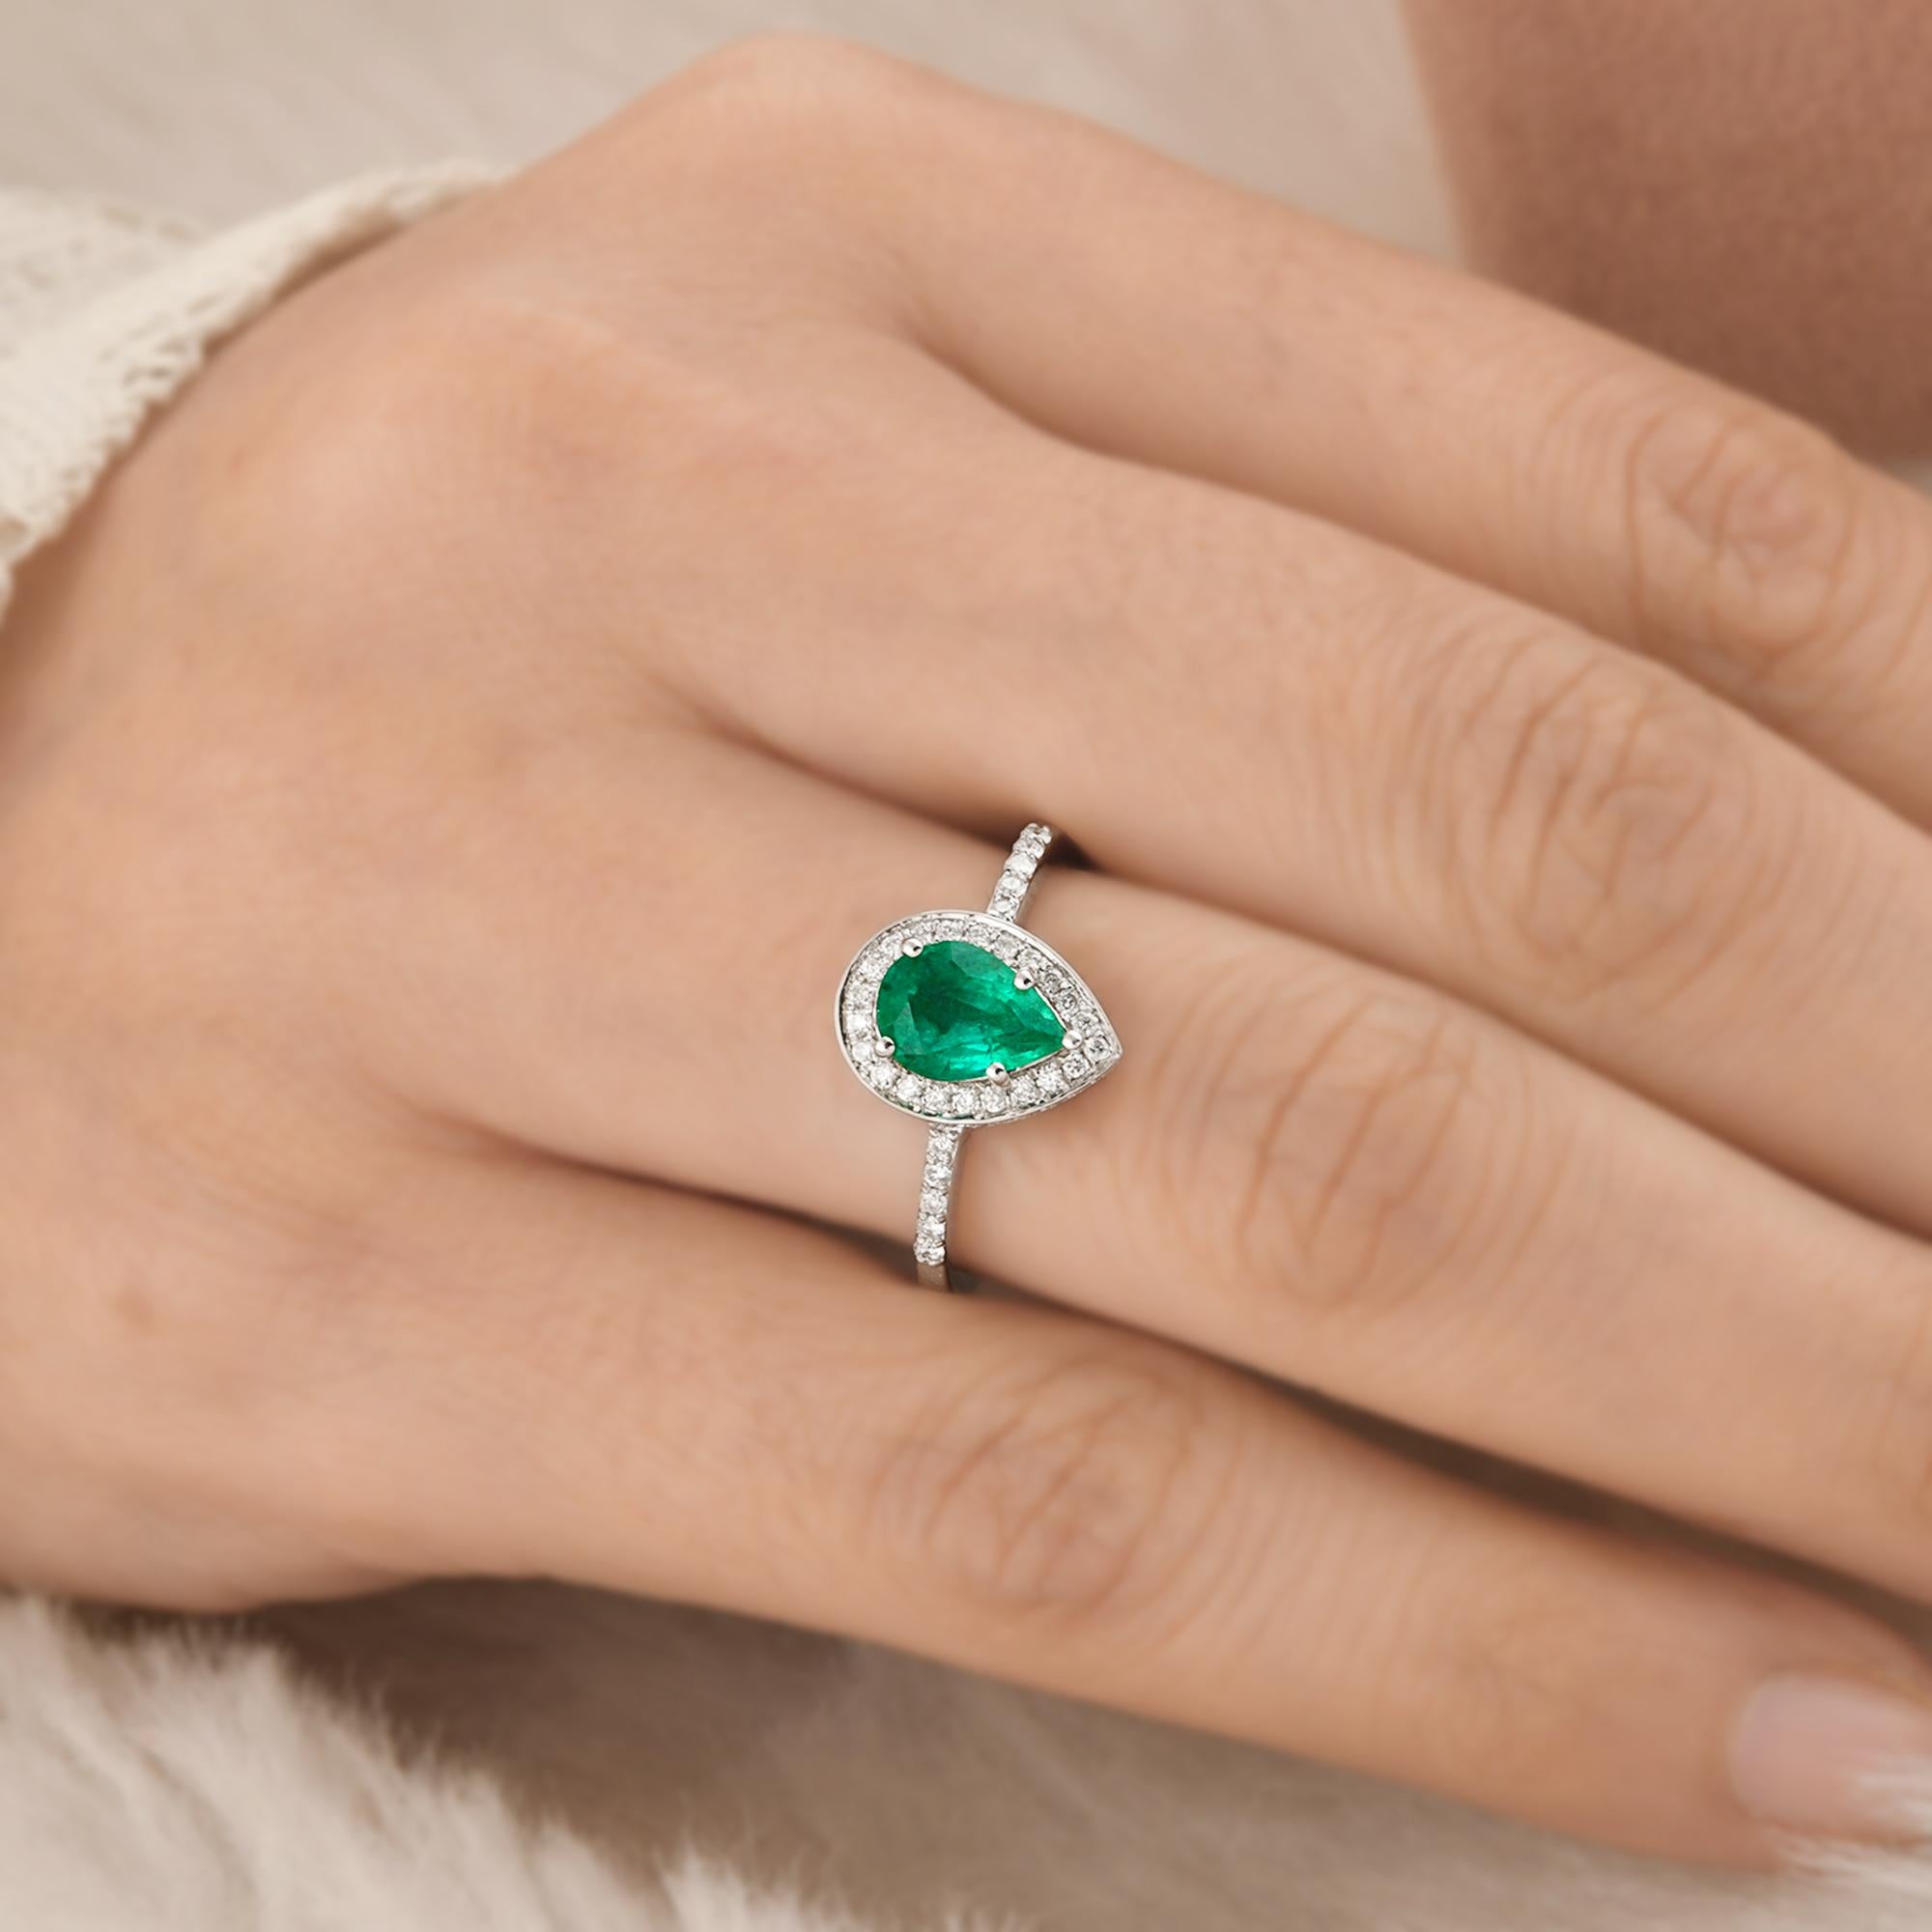 Modern 1.40 Tcw Pear Natural Emerald Gemstone Halo Ring Diamond 14k White Gold Jewelry For Sale